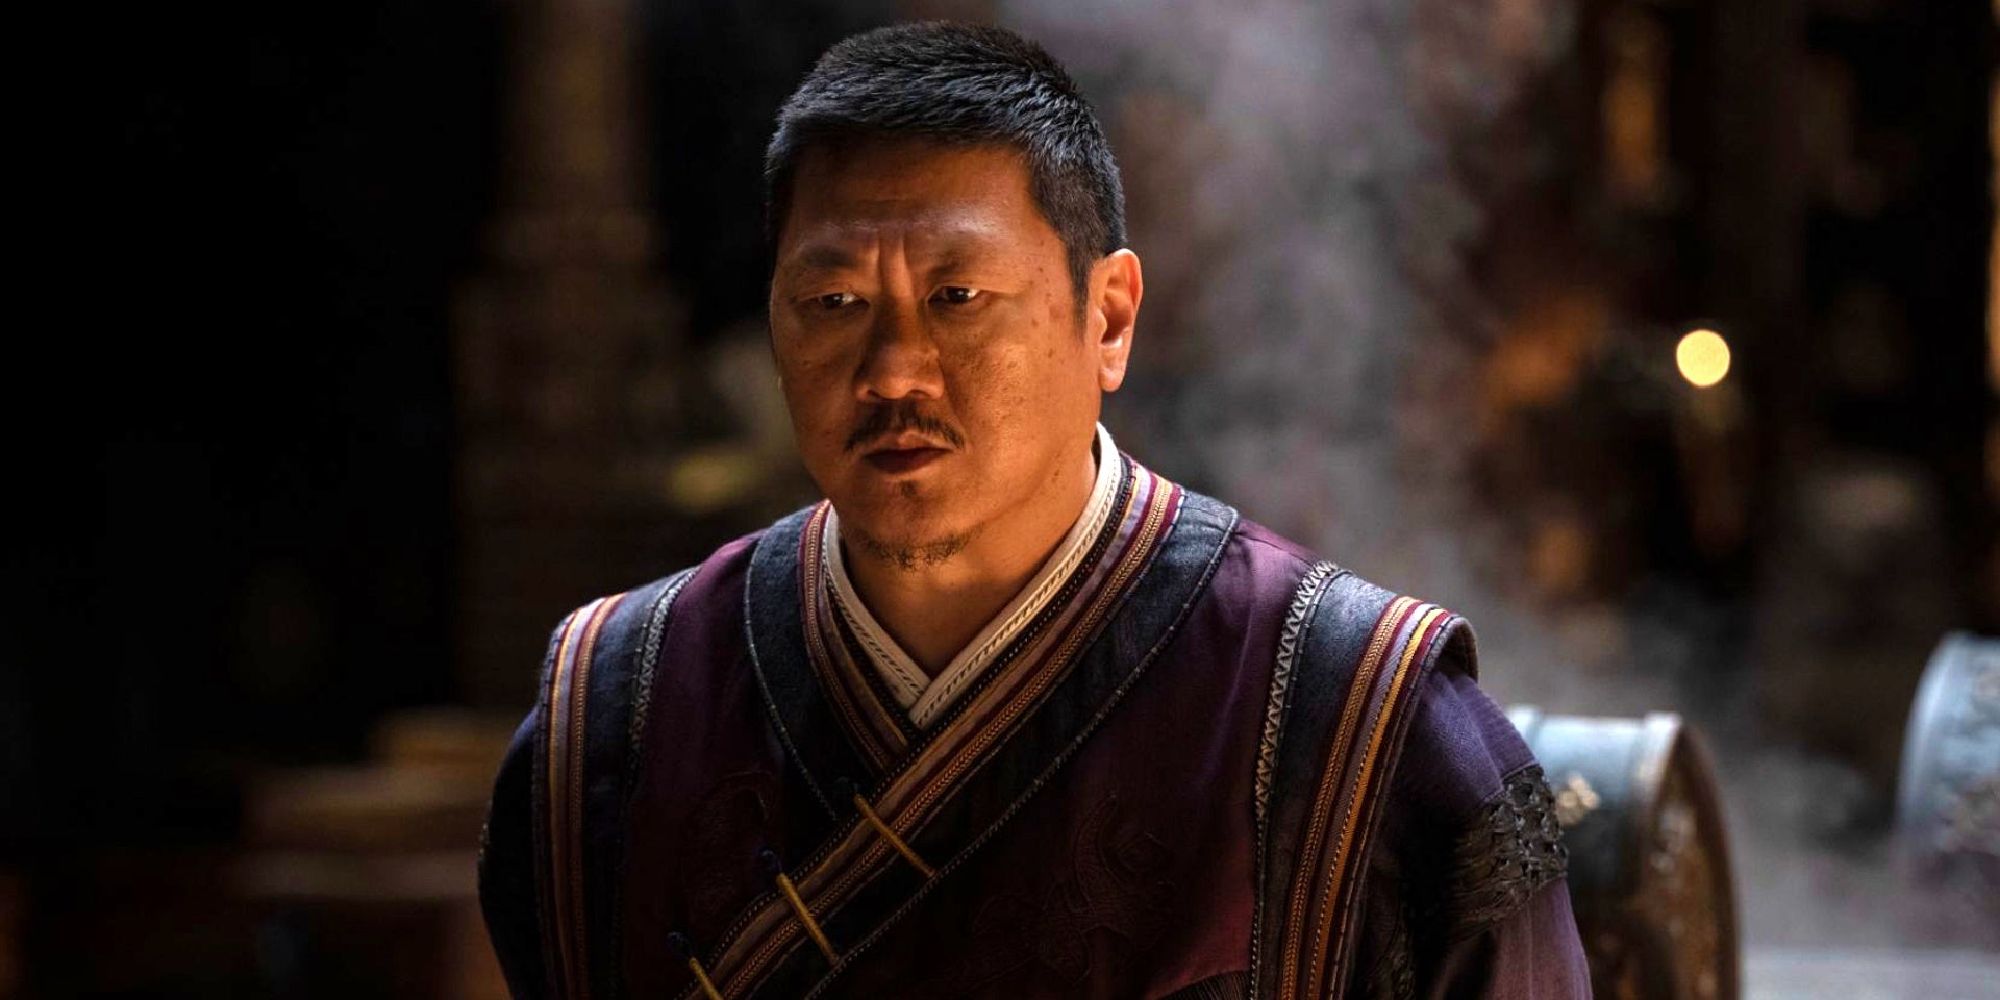 Wong standing and looking pensive in 'Doctor Strange'